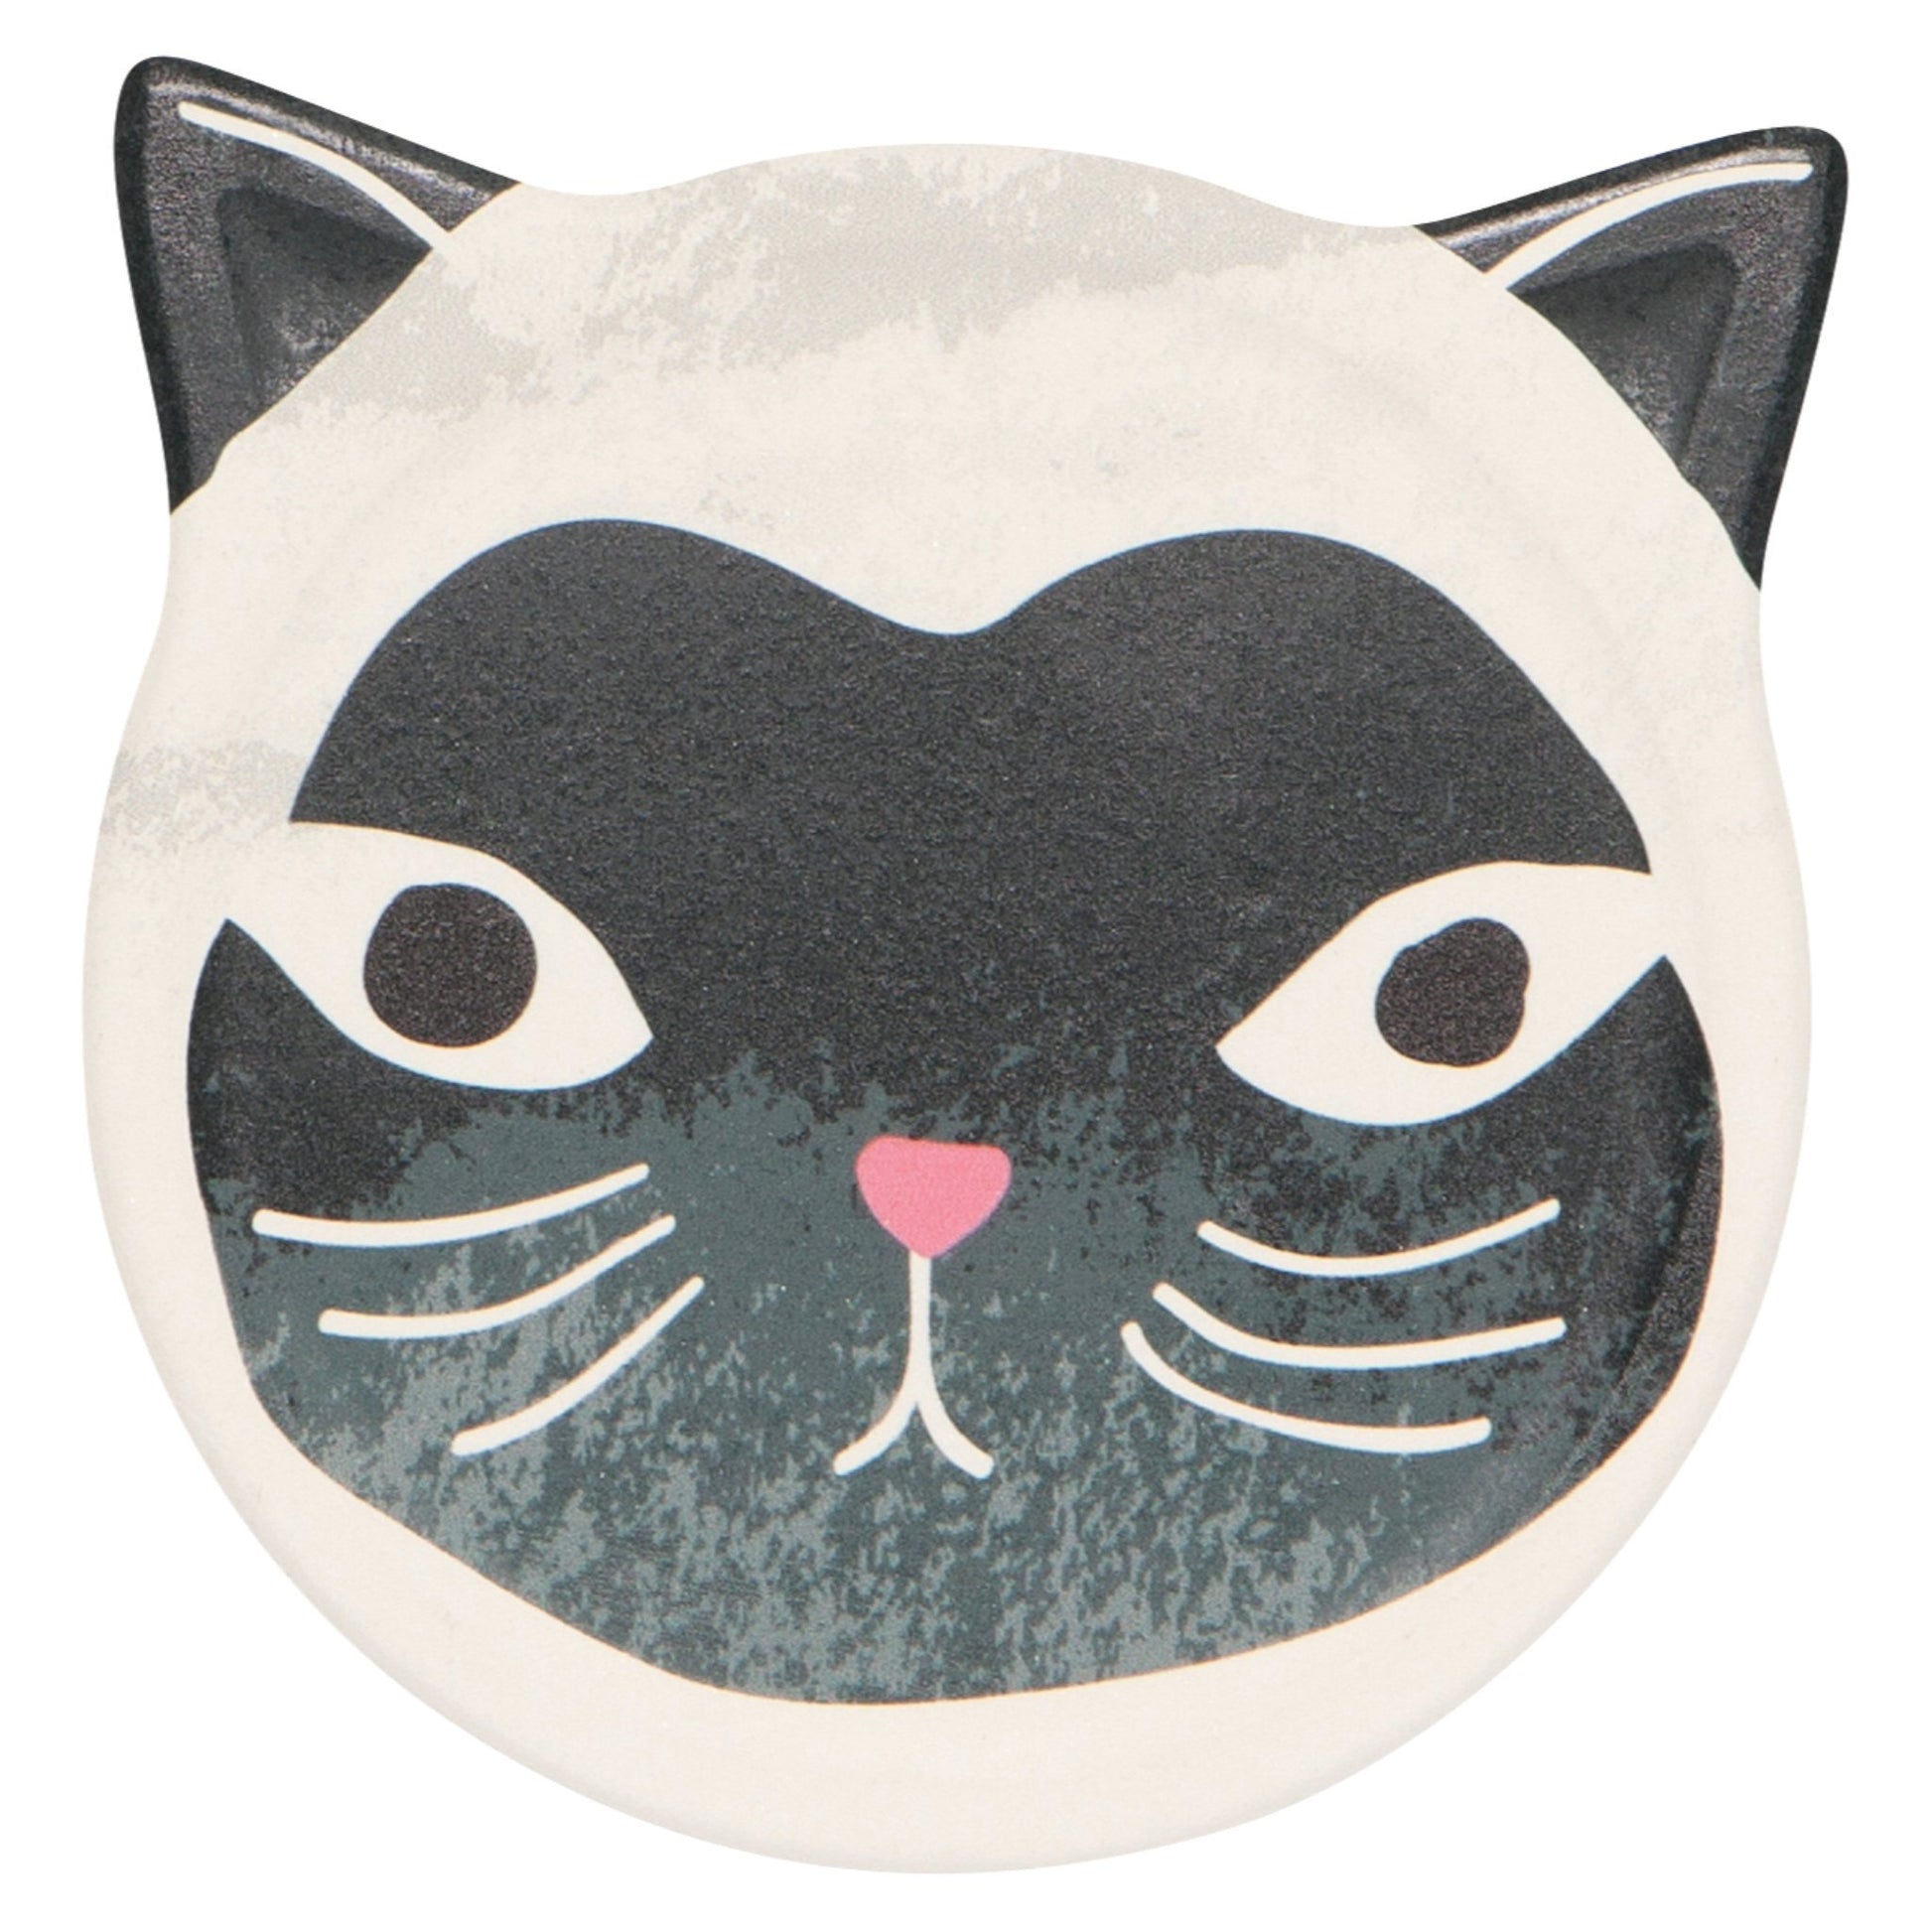 "The Cats Meow": Soak Up Coasters (Set of 4) - Tiny Tiger Gift Shop